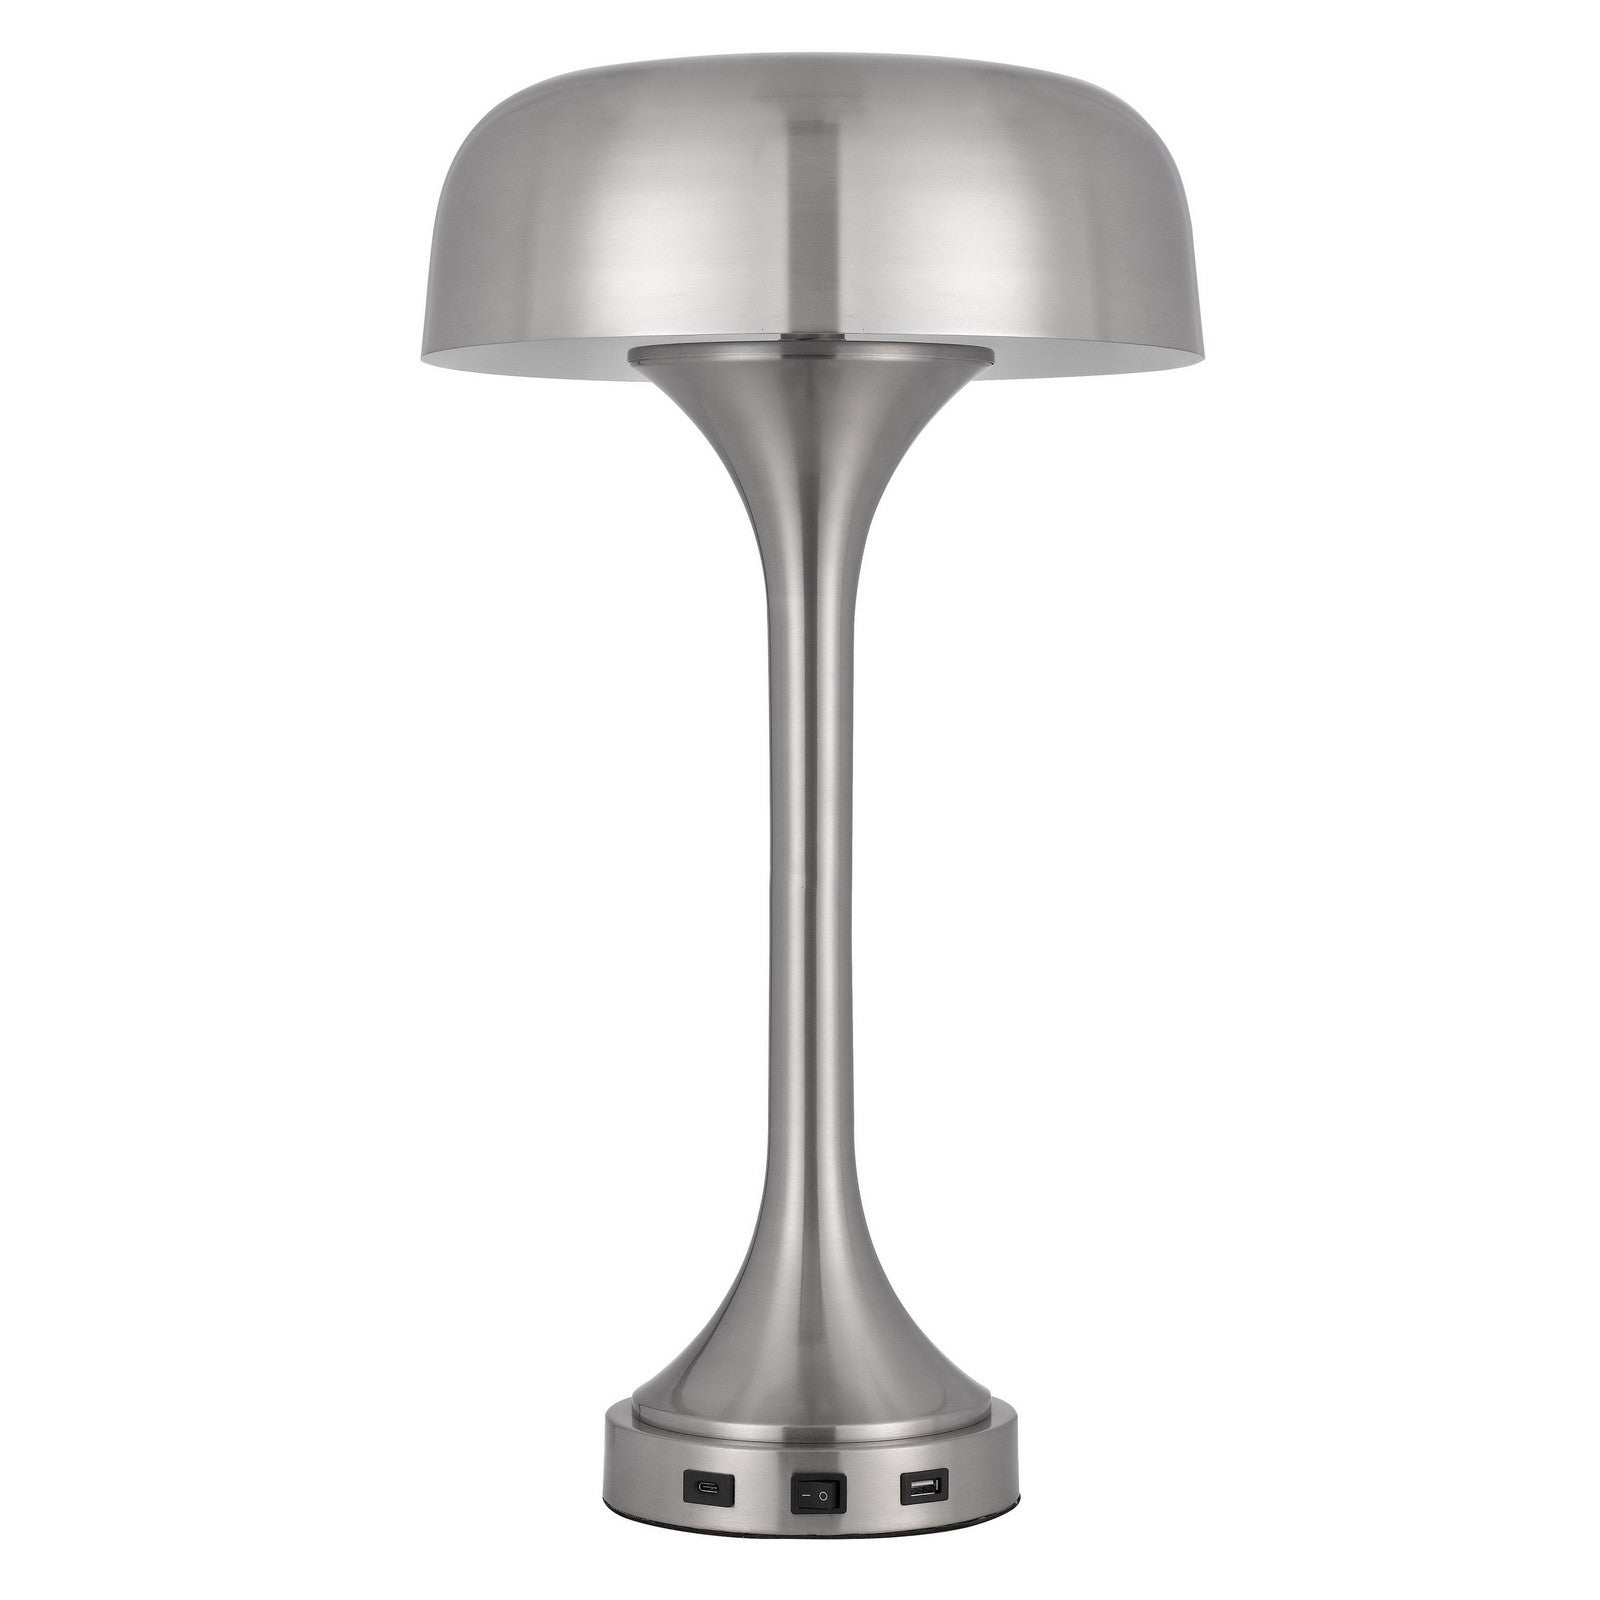 22" Nickel Metal Two Light Usb Table Lamp With Nickel Dome Shade